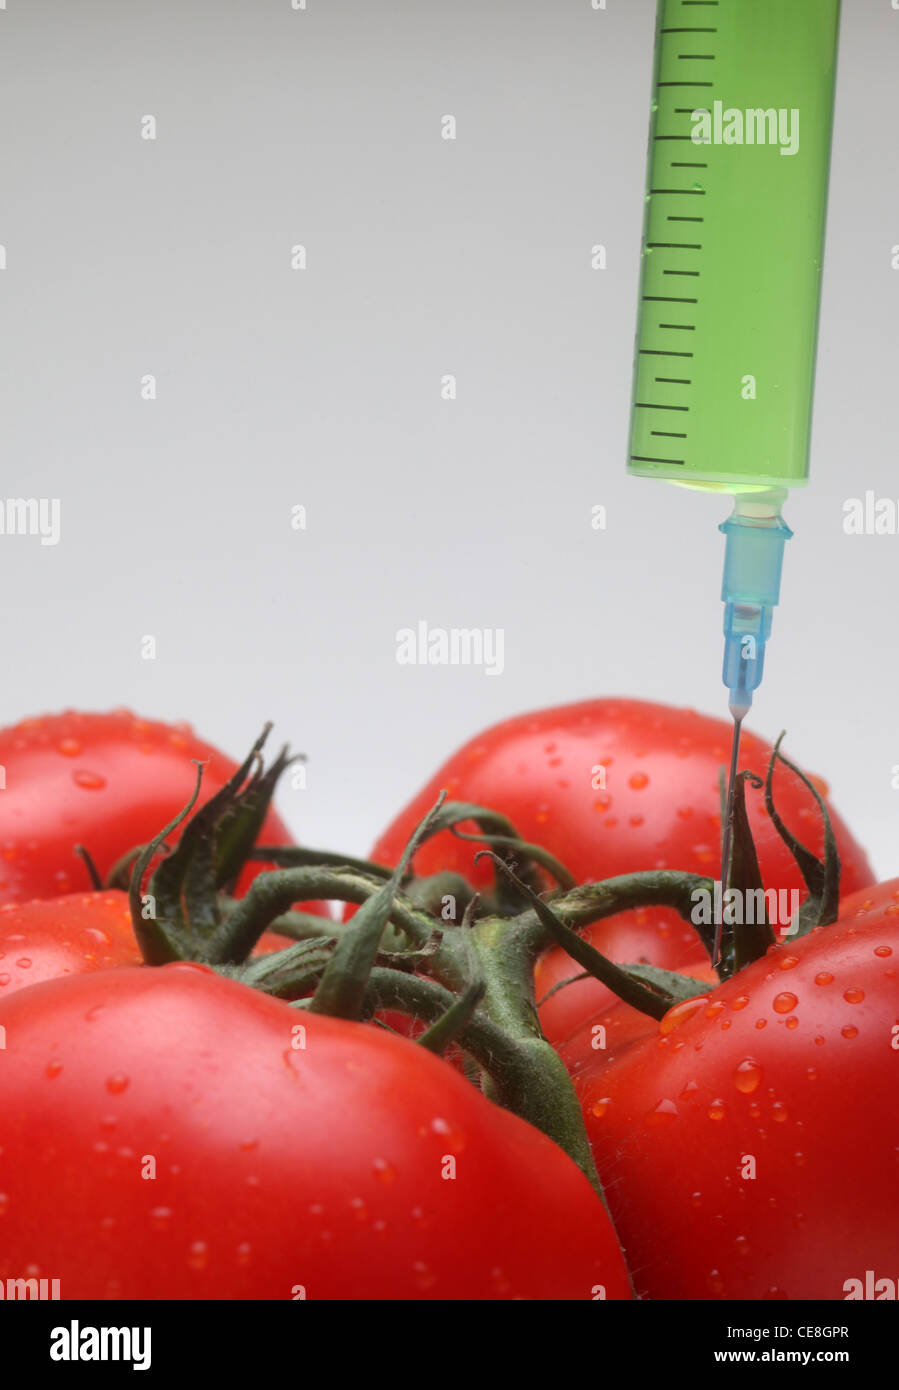 Injection into fresh red tomato Stock Photo